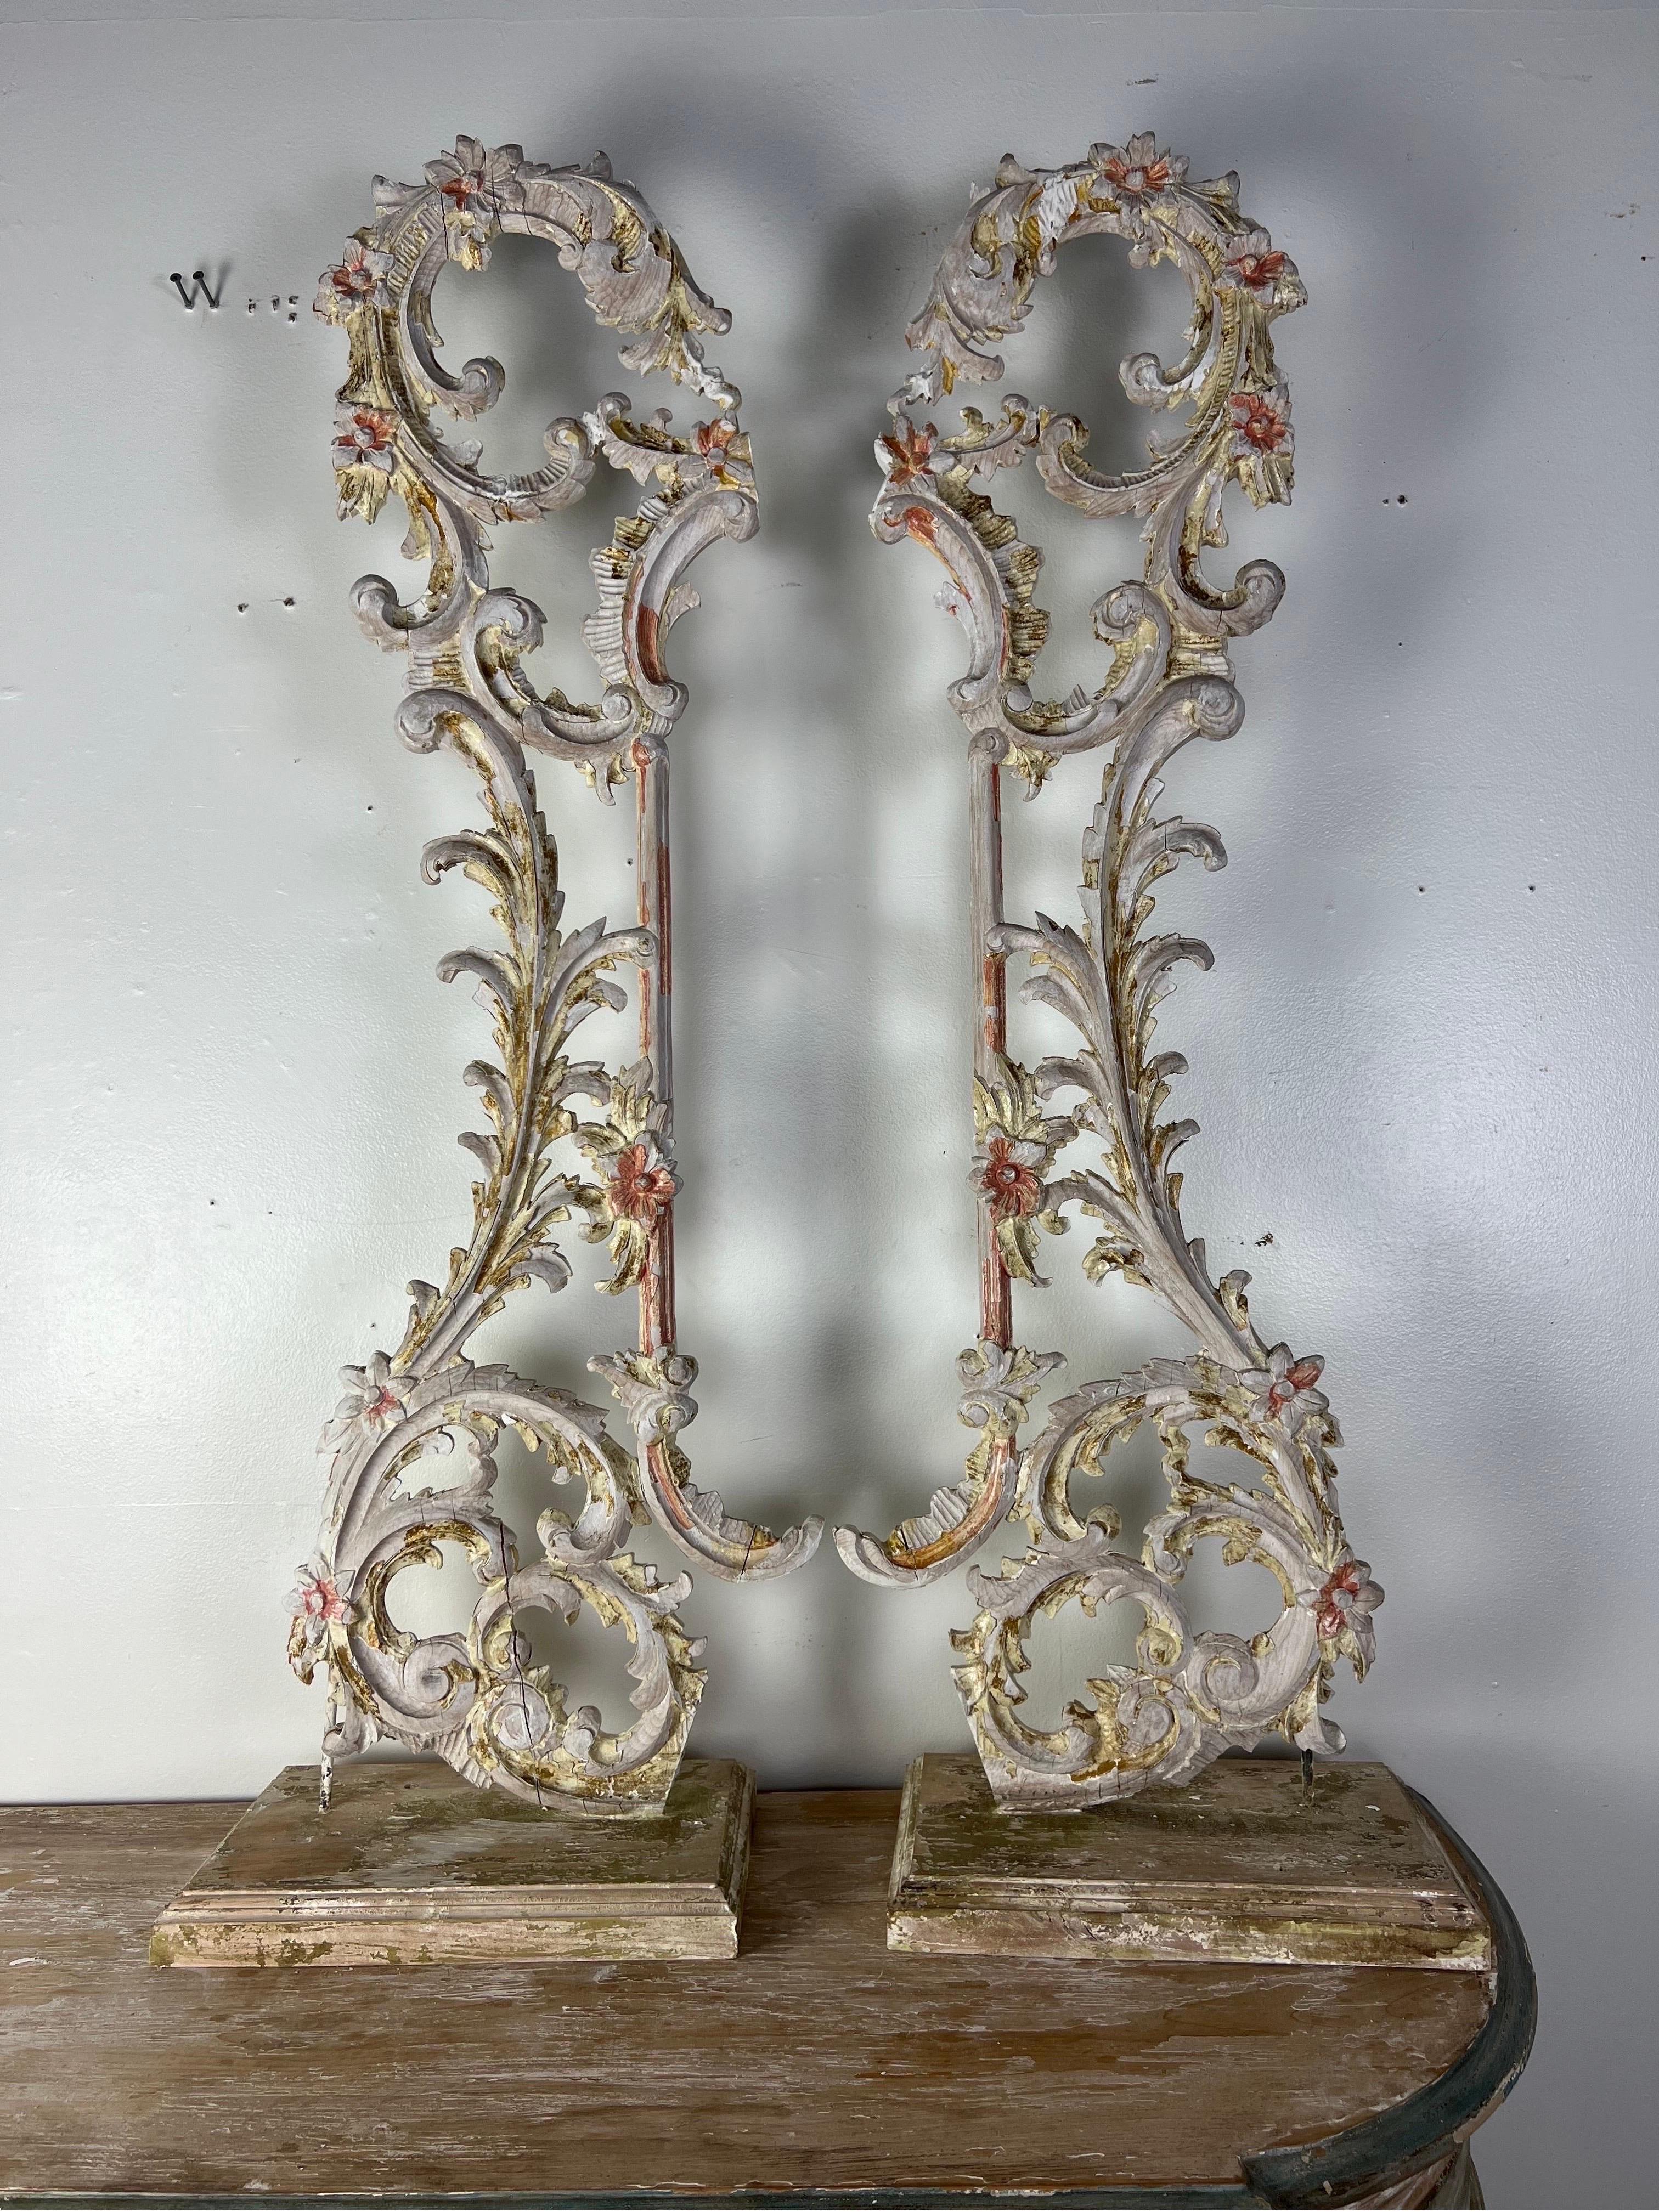 A pair of 19th-century carved Italian architectural elements mounted on wood bases.  The Rococo style carvings showcase intricate detailing, curvilinear forms, and ornate motifs throughout.  These pieces could serve as captivating decorative accents